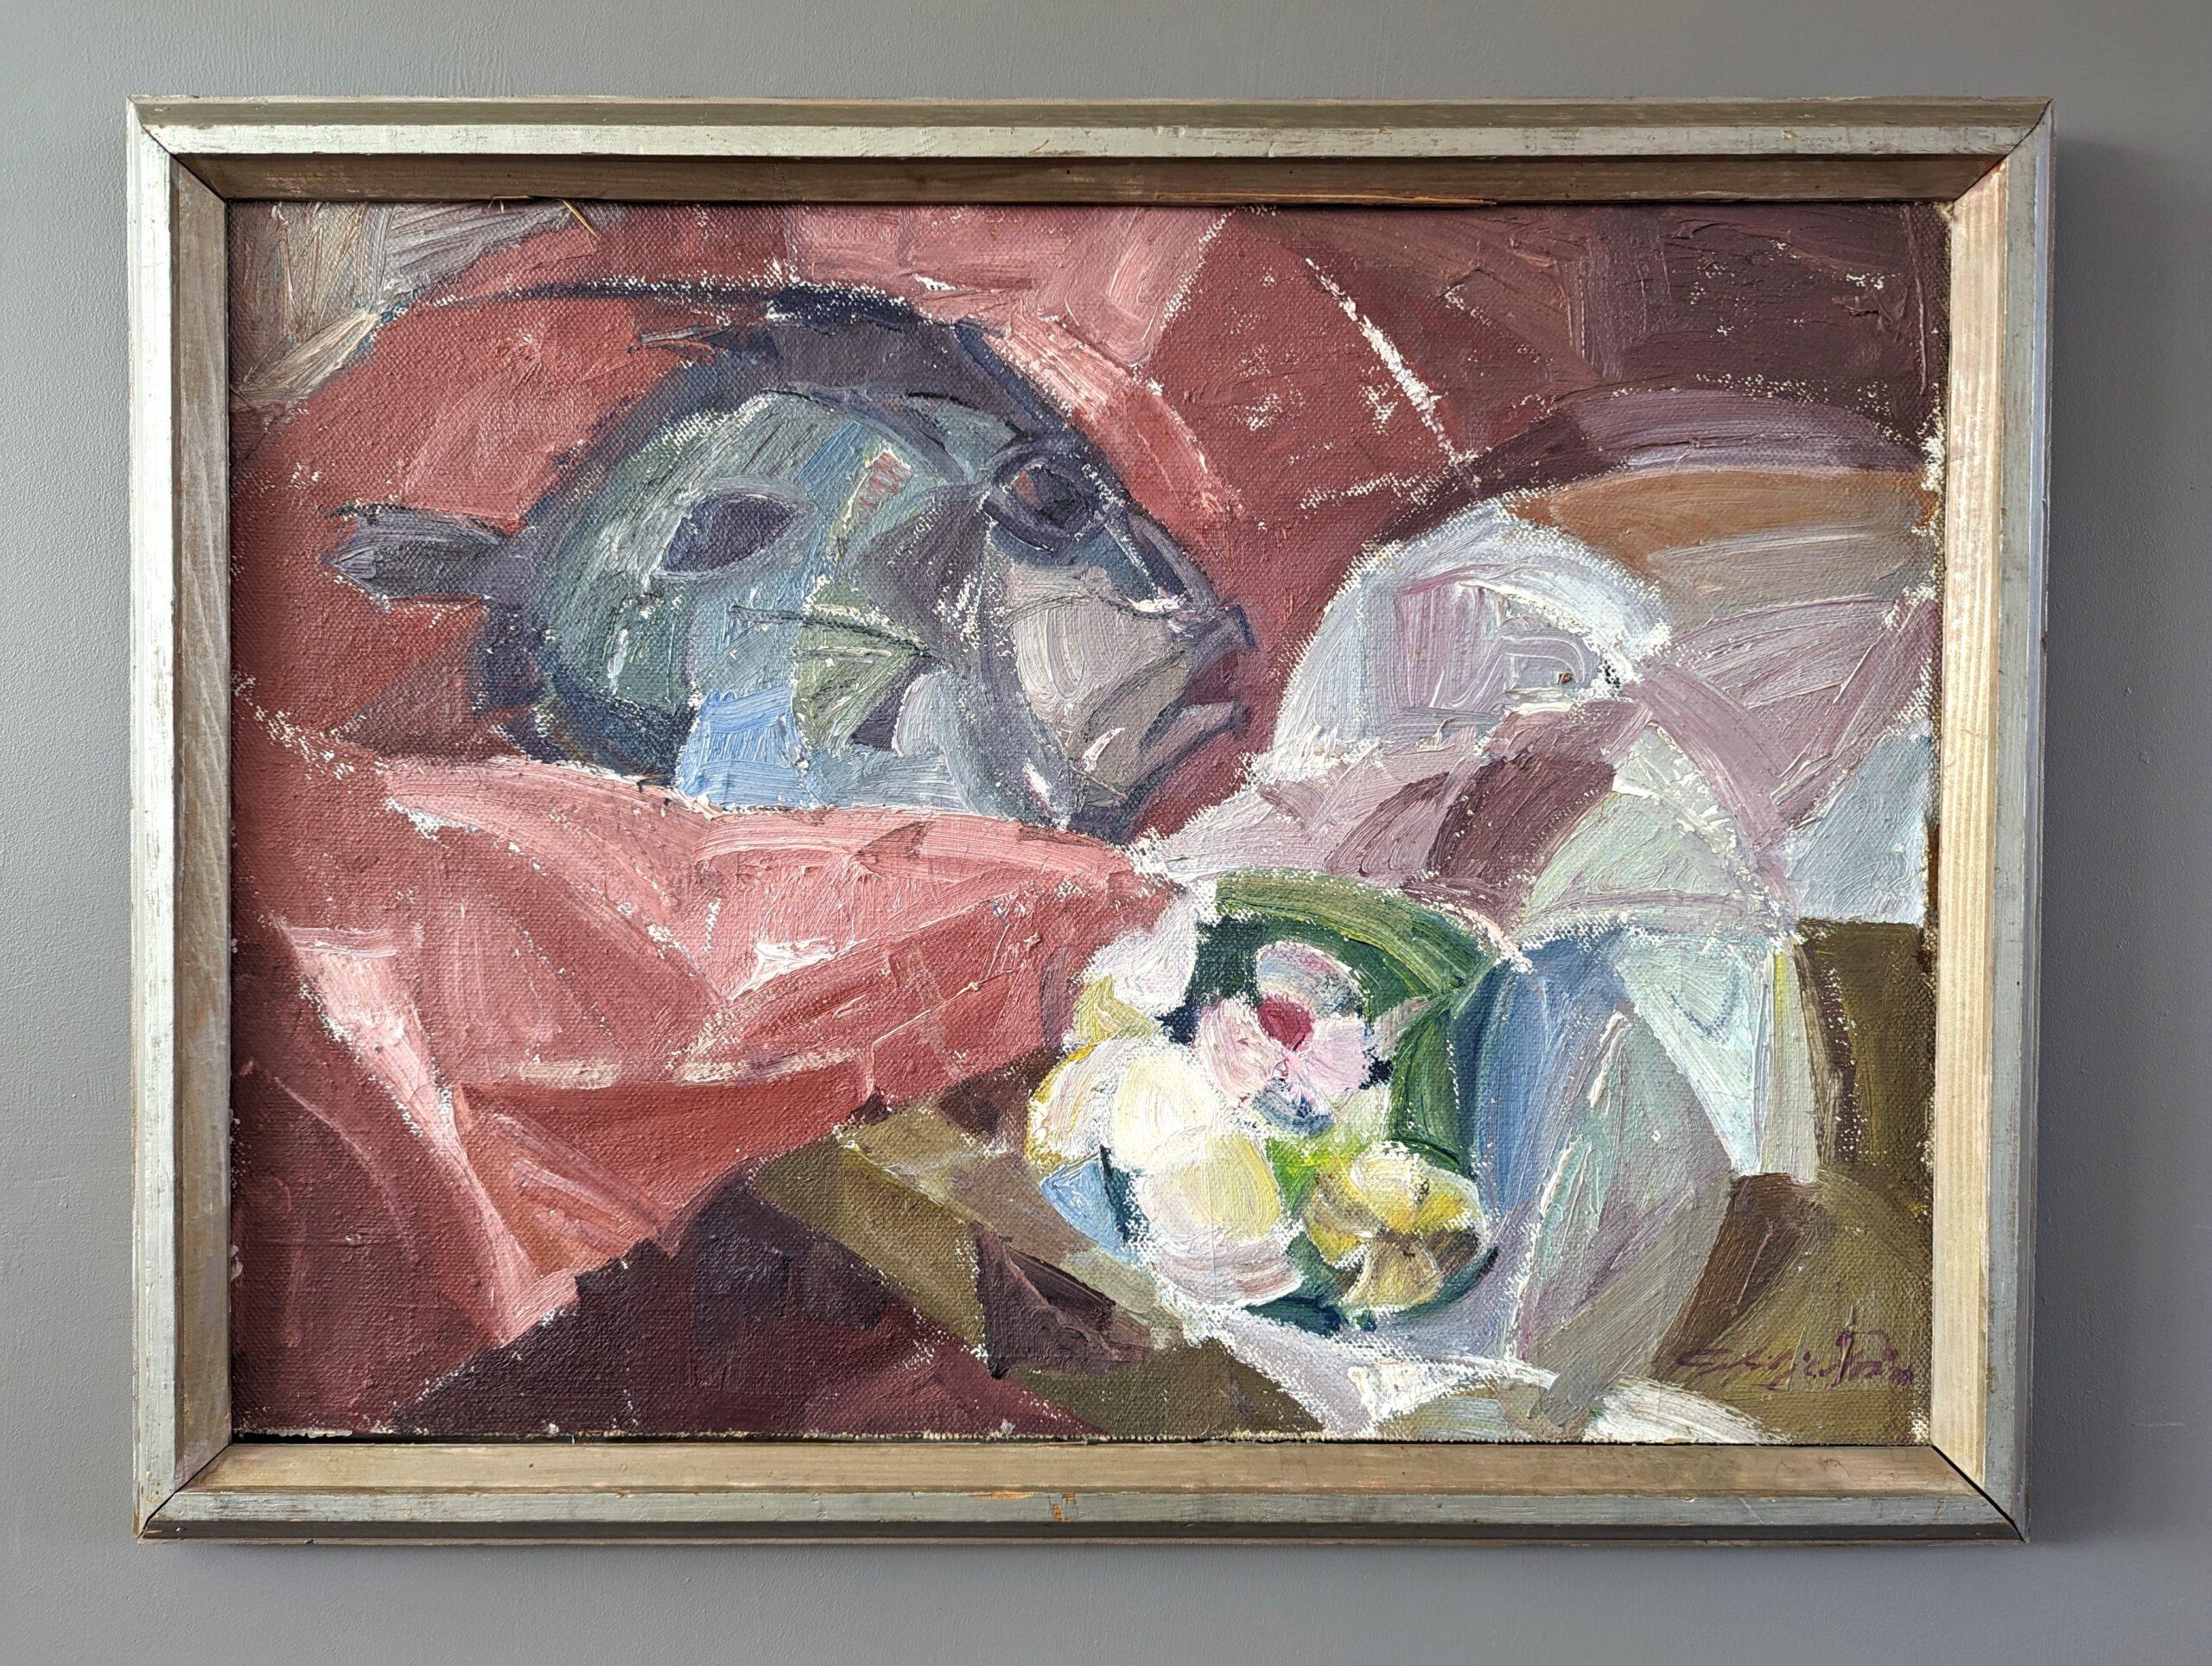 FISH & FLOWERS
Size: 47 x 62 cm (including frame)
Oil on Canvas Laid onto Board

A characterful mid-century modernist style still life oil composition, painted onto canvas.

At the heart of the painting lies a table setting adorned with a striking